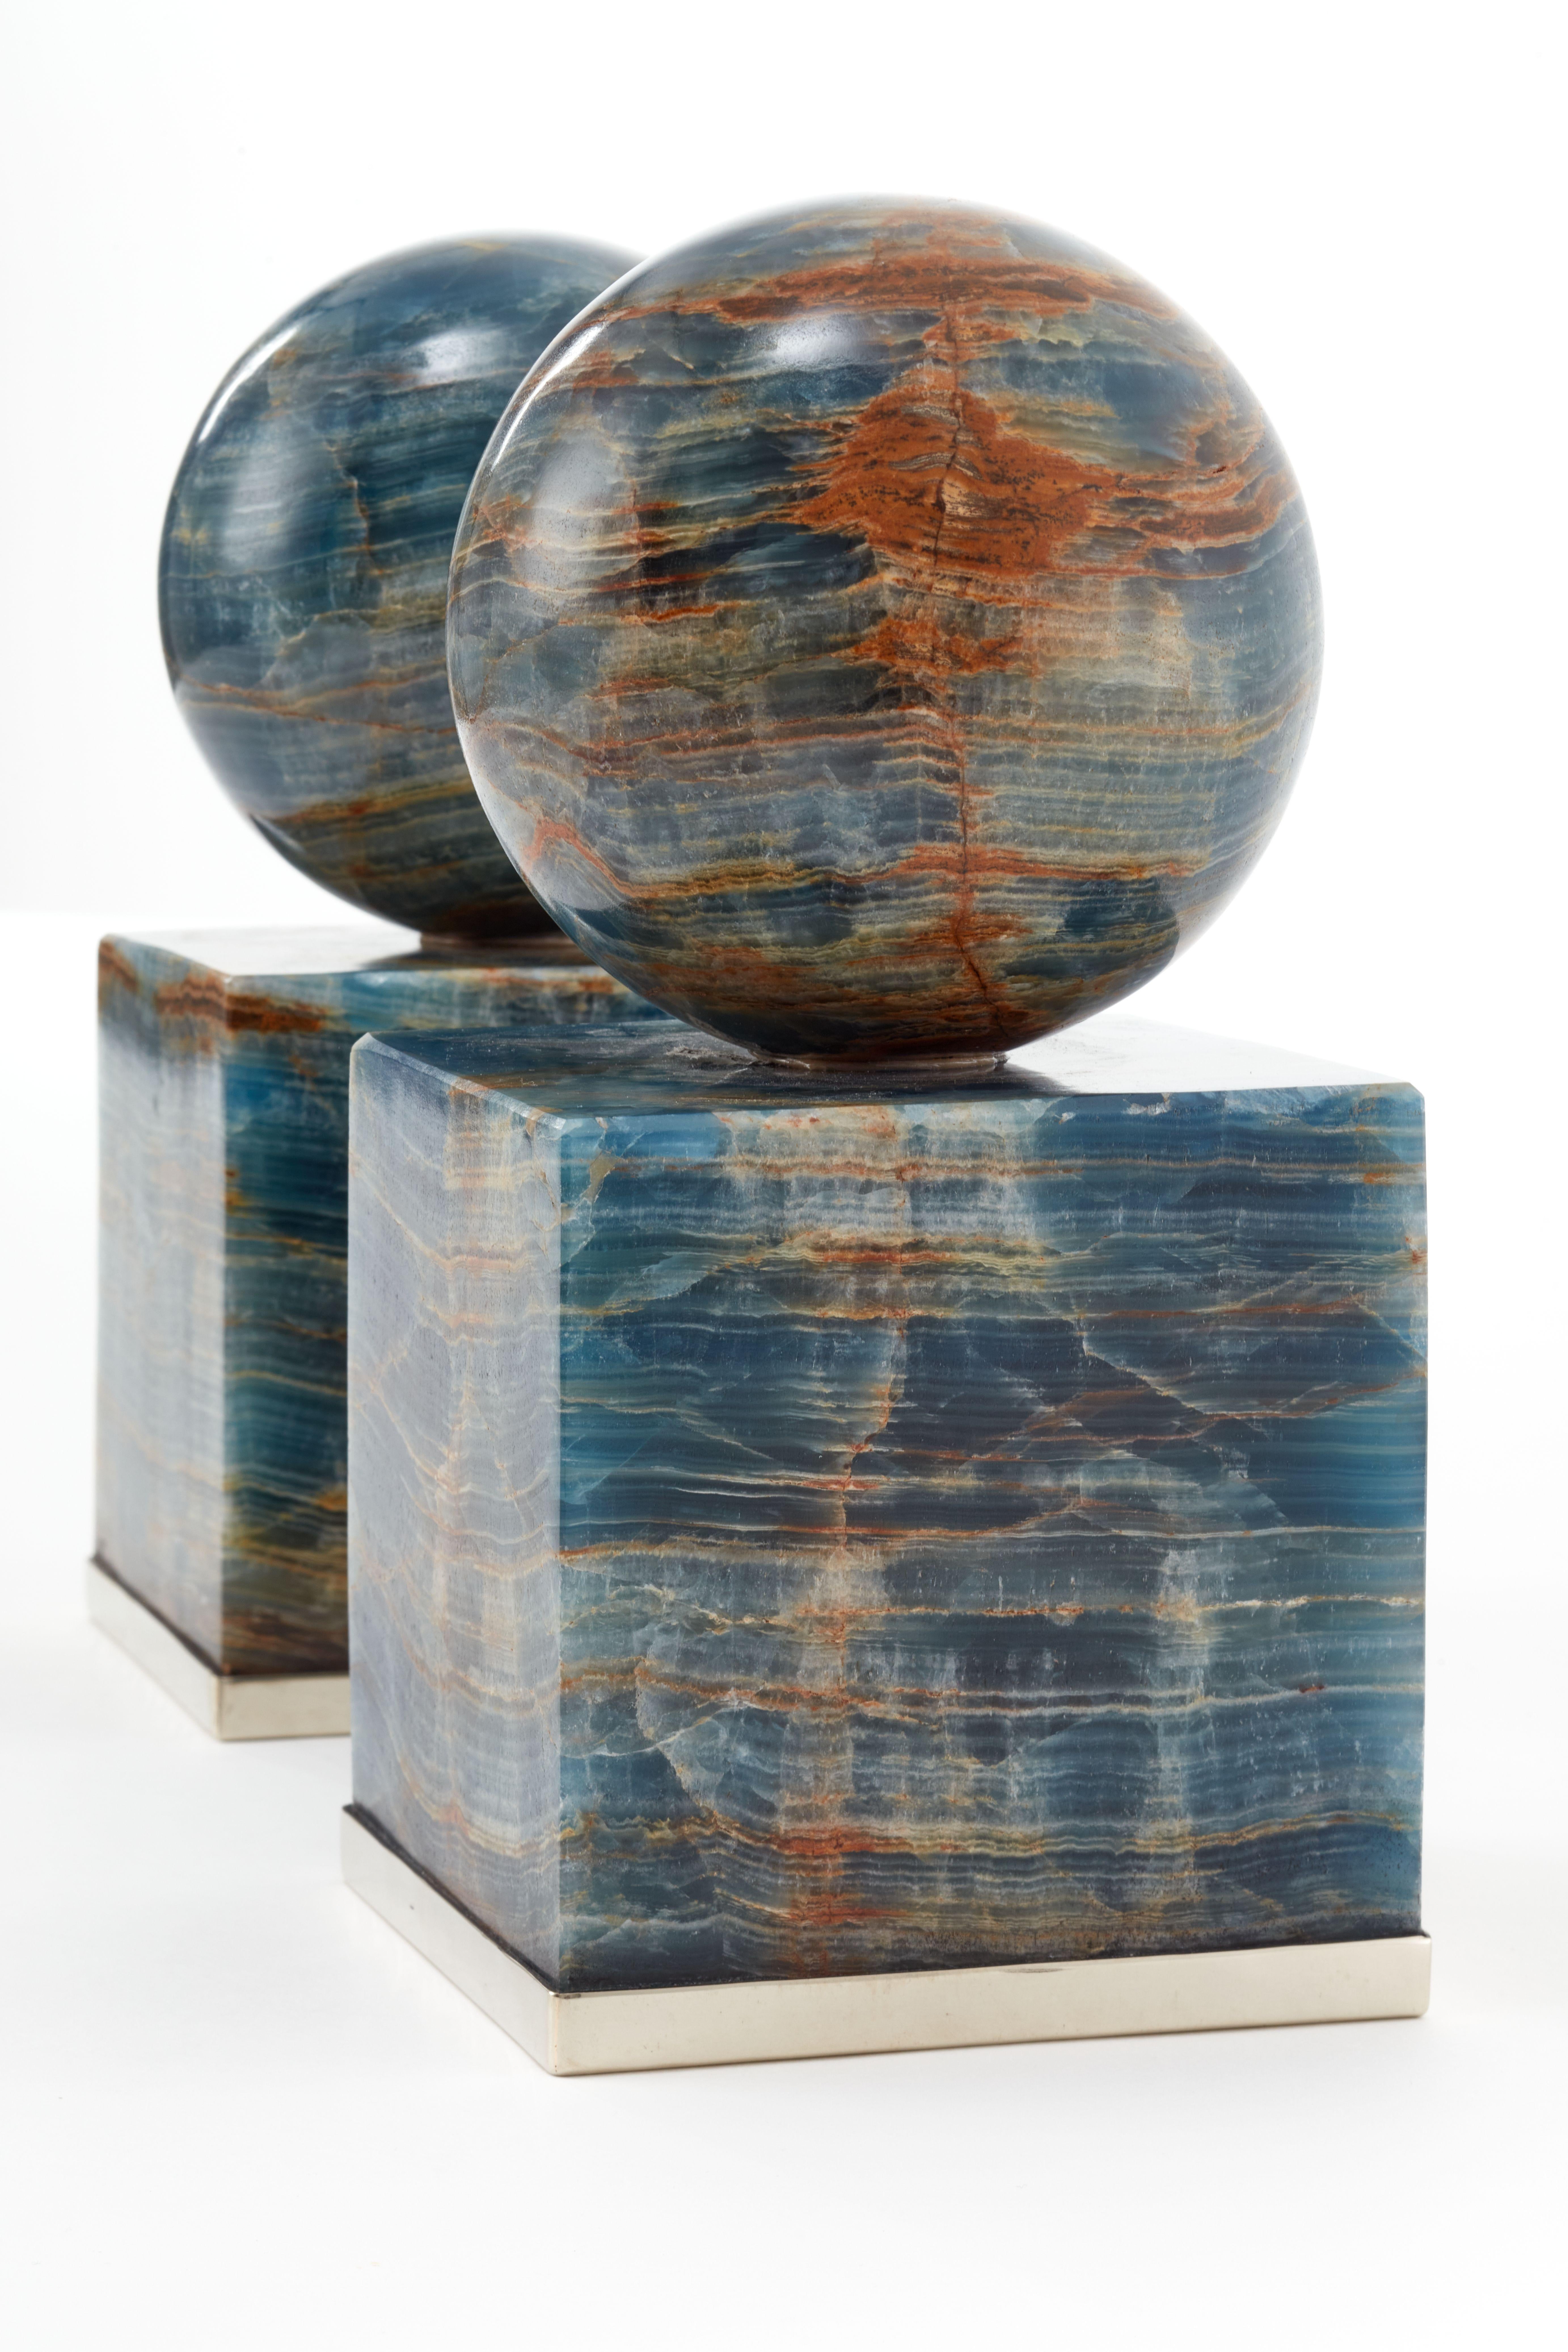 Cuyo bookends are solid heavy beautiful pieces of geometrical onyx stone, mostly in square base and round top. Very sharm for a personal library.

Our pieces are made by hand. One of a kind.
All natural stones may vary in color.